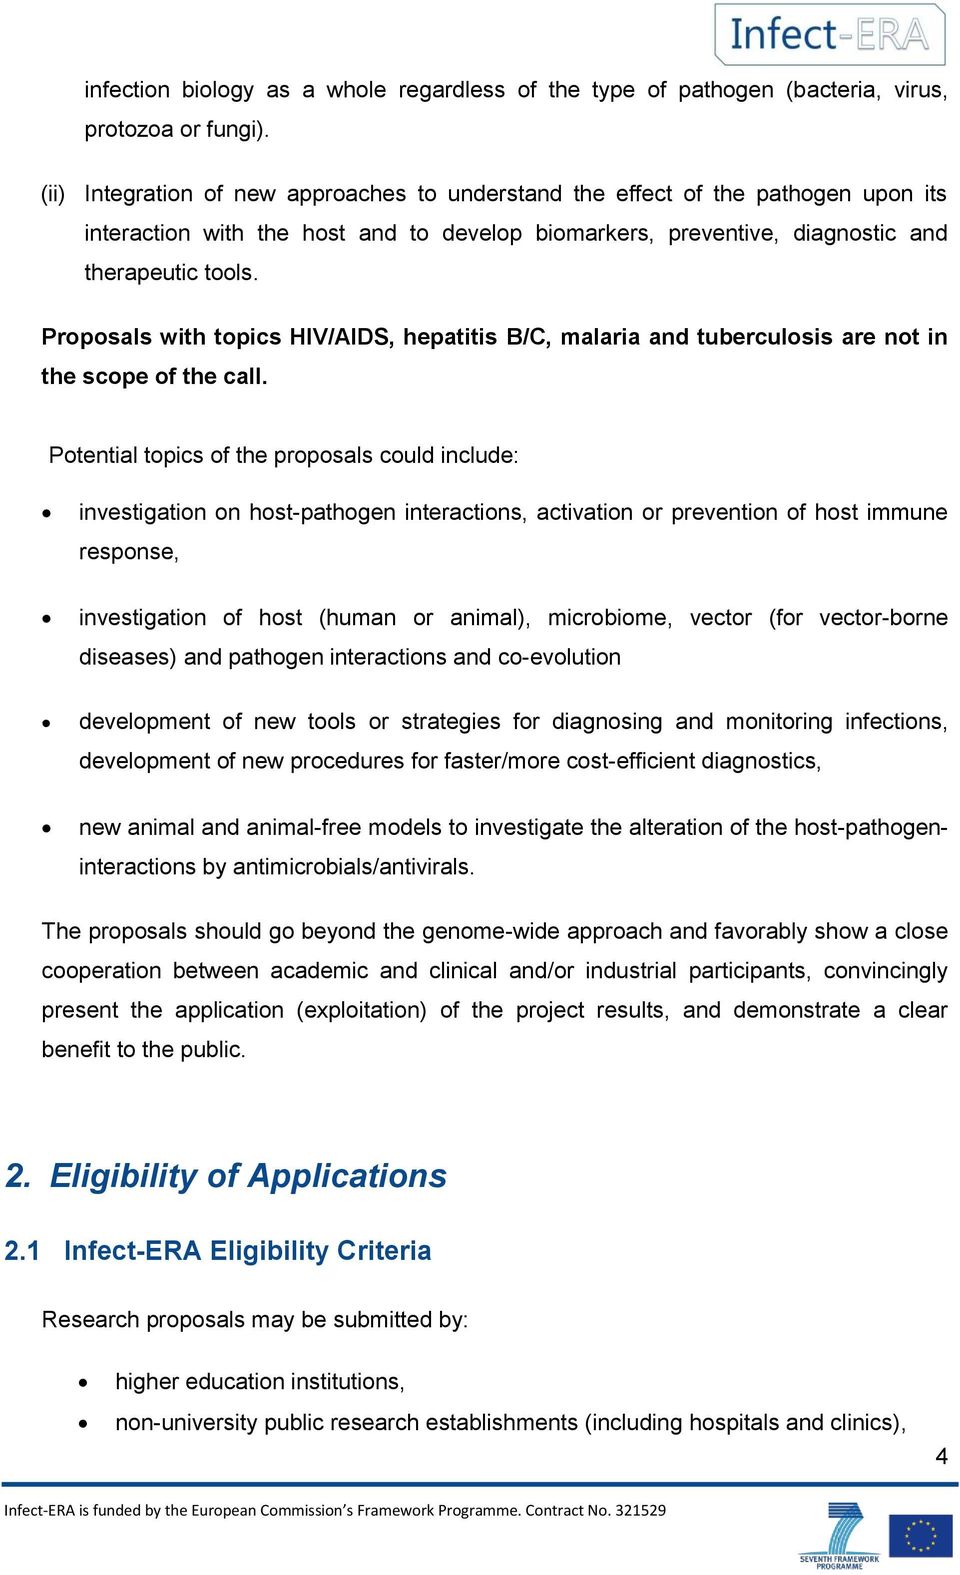 Proposals with topics HIV/AIDS, hepatitis B/C, malaria and tuberculosis are not in the scope of the call.